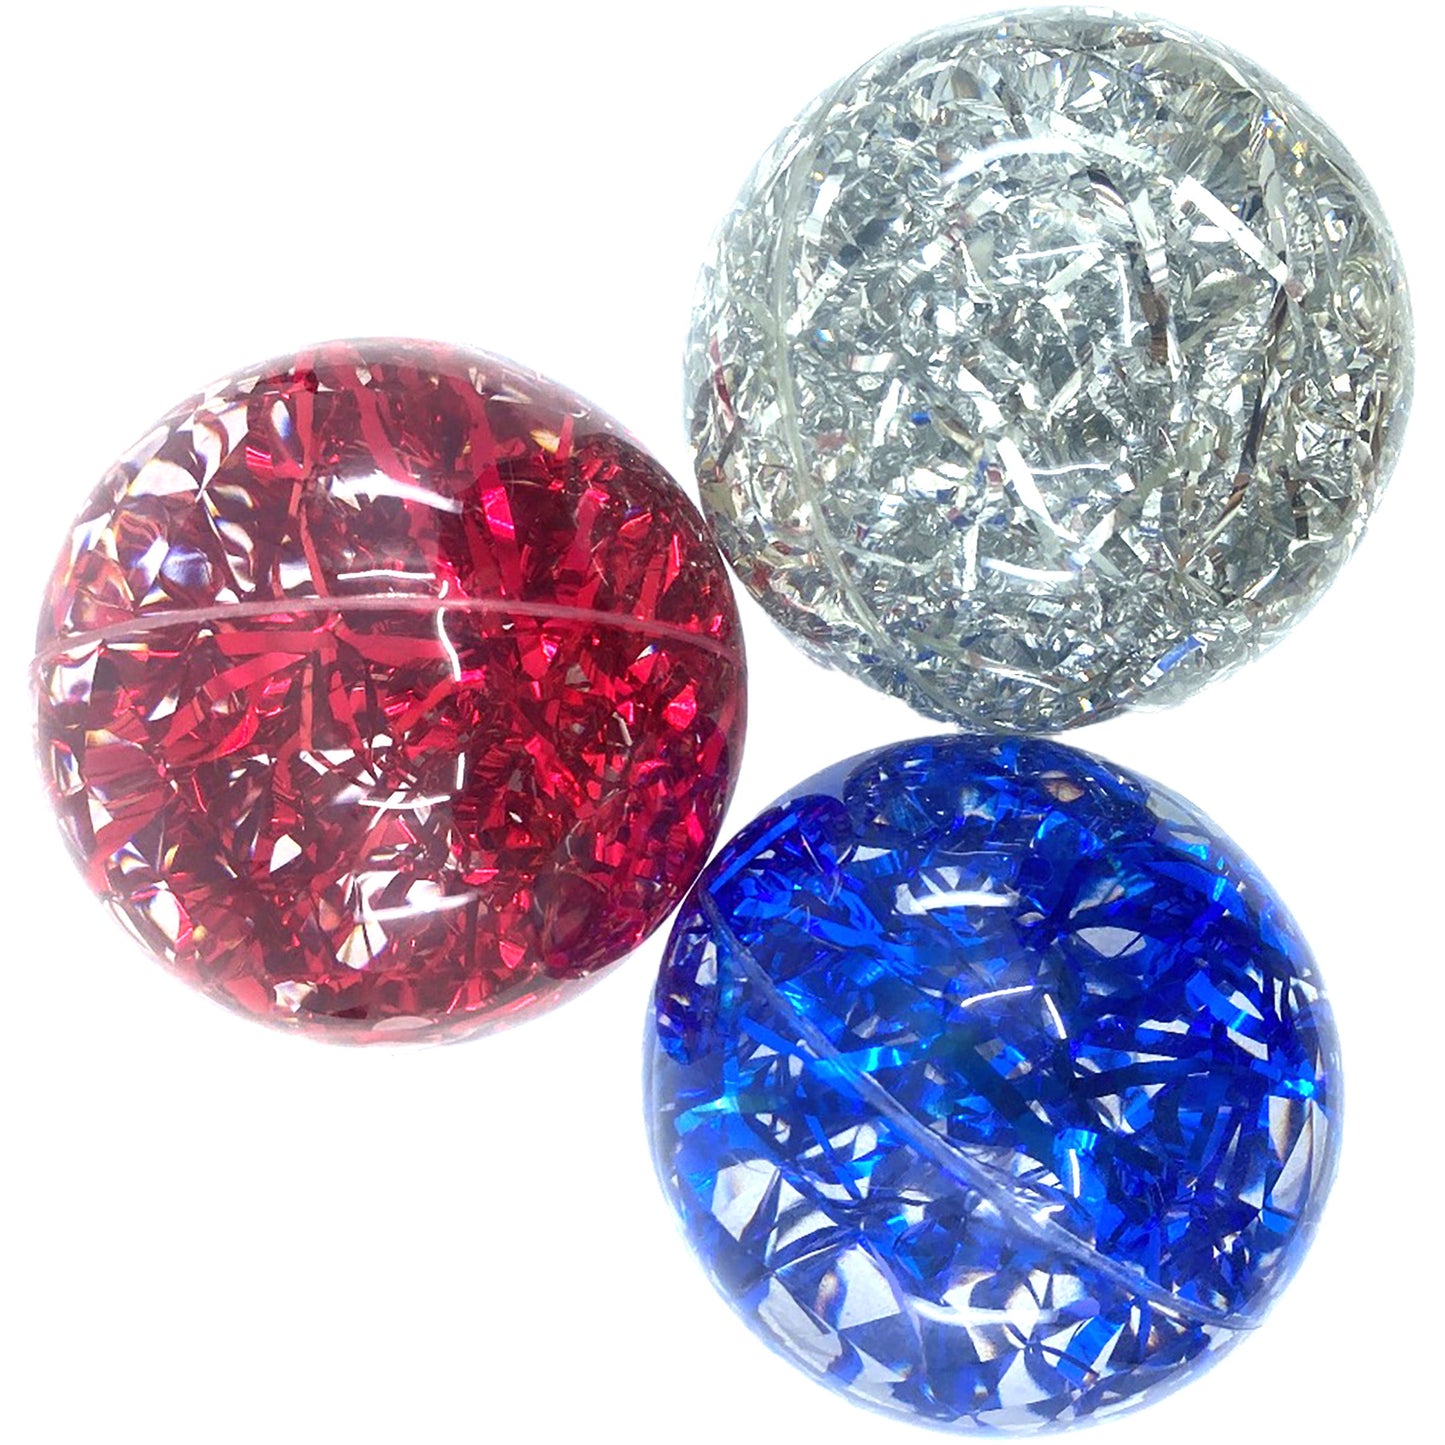 ITEM NUMBER 022551C GLITTER BALL - BULK PACKED SOLD AS IS 24 PIECES PER CASE